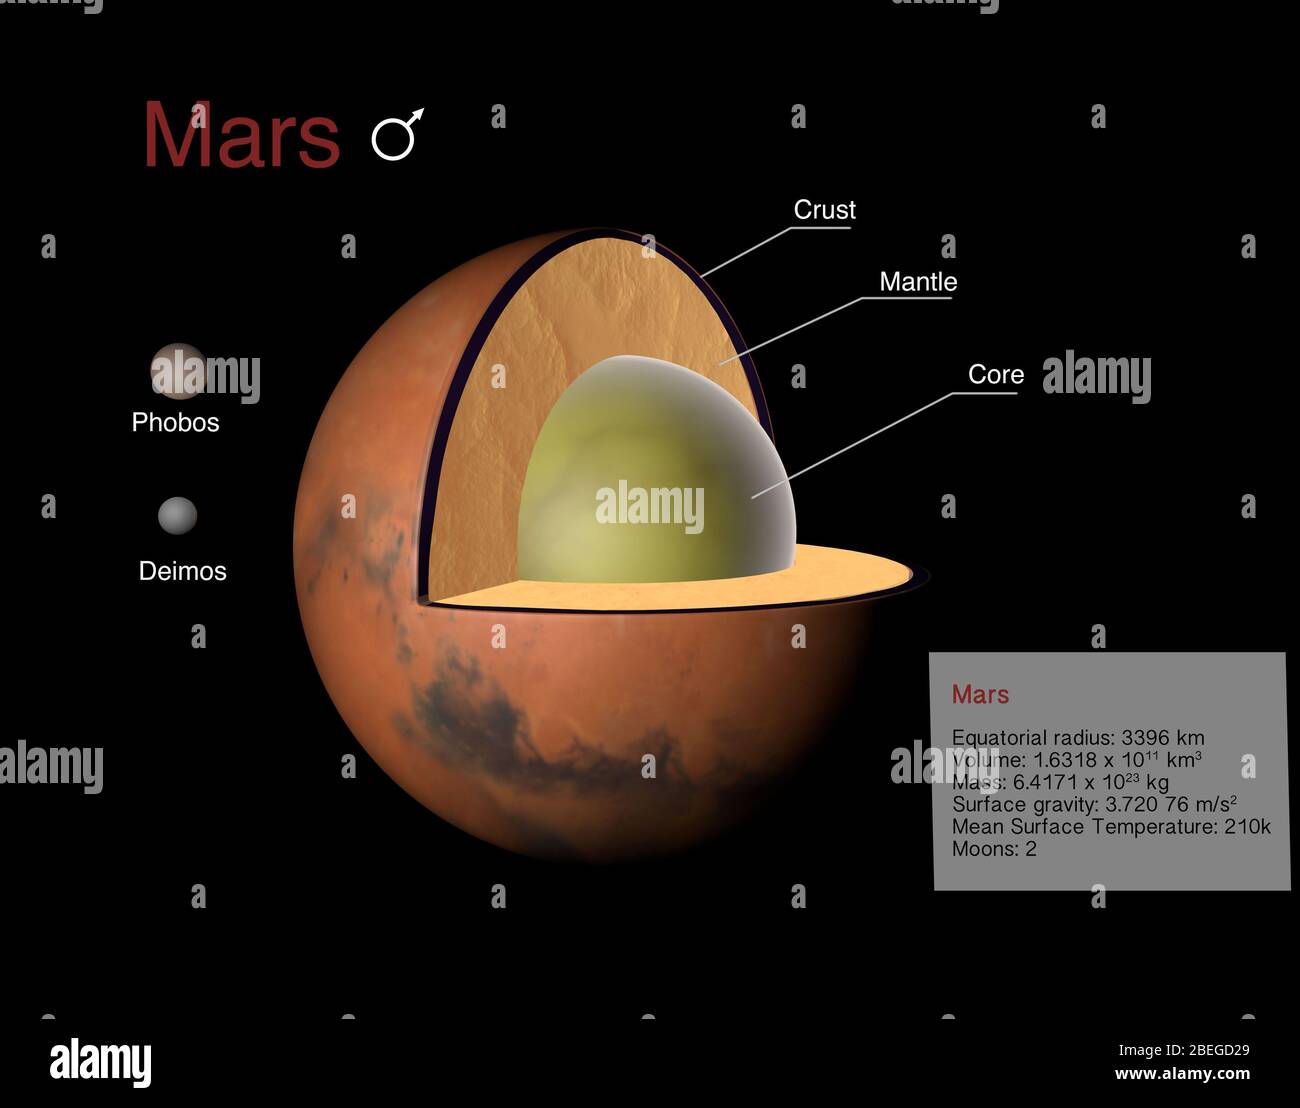 Illustration of the planet Mars. The crust, mantle and core are labeled in cutaway view. Also shown are Mars' moons, Phobos and Deimos, as well as facts relating to Mars' size, gravity and temperature. Stock Photo